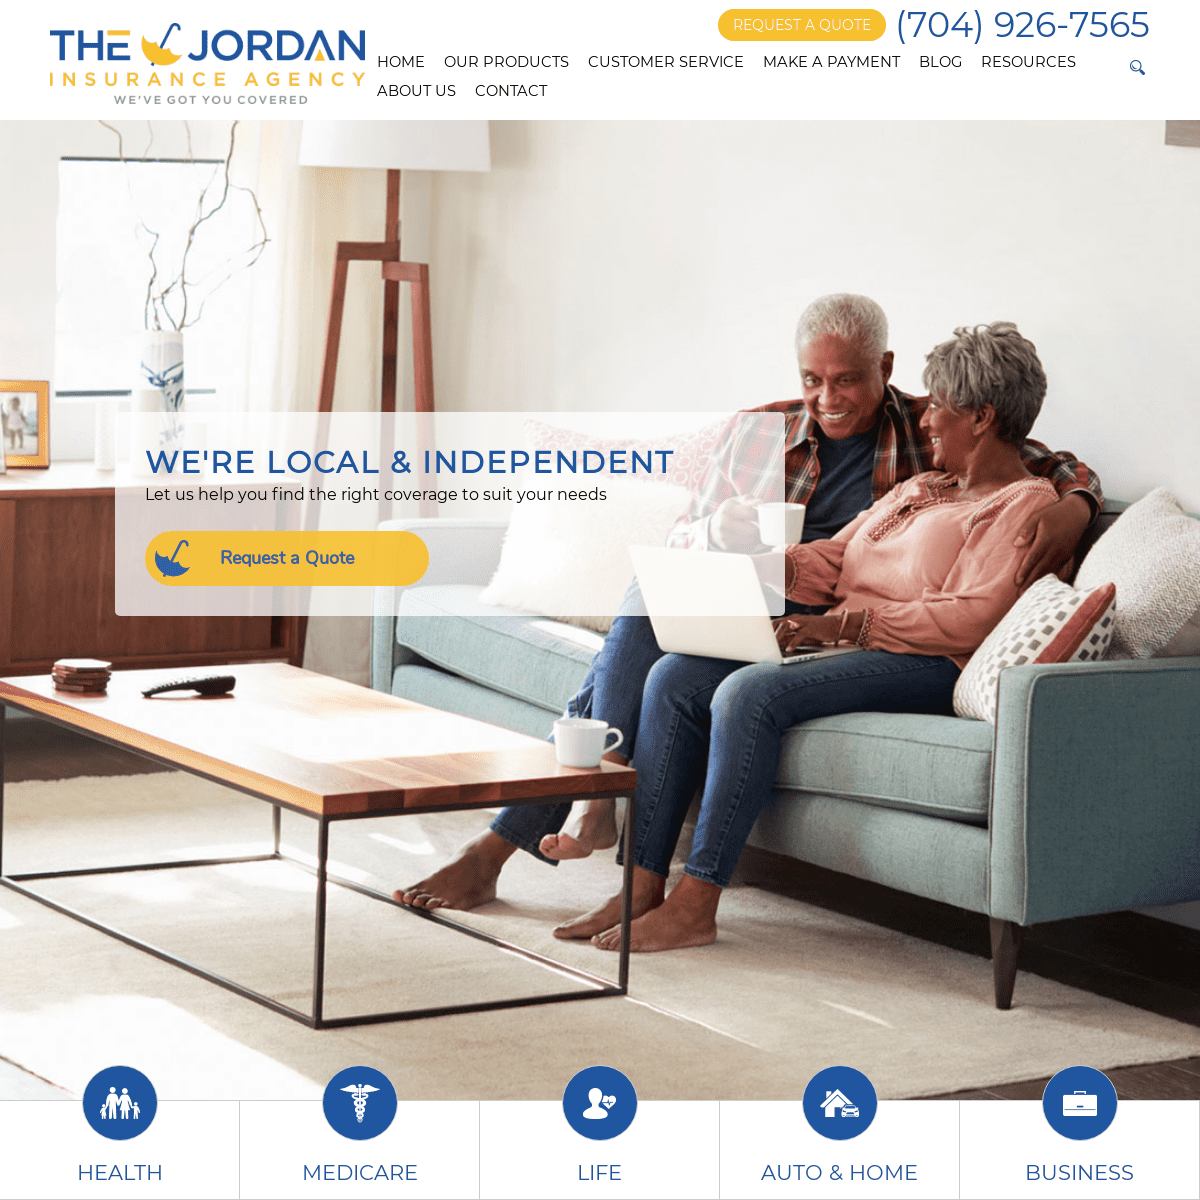 A complete backup of thejordaninsuranceagency.com